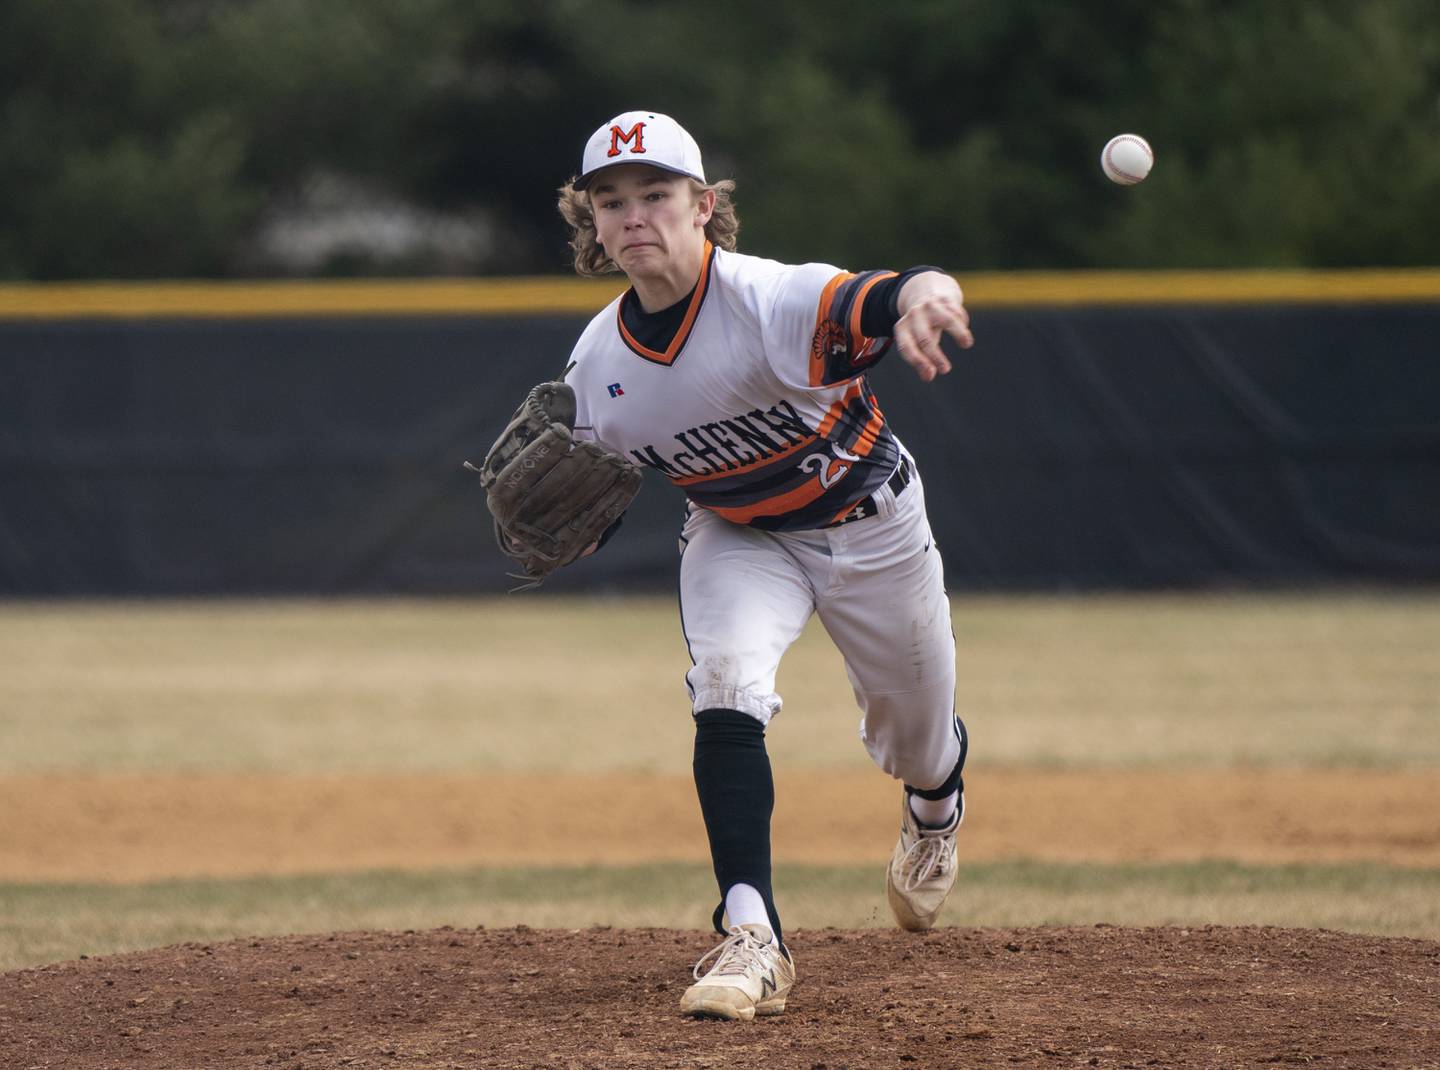 McHenry's Lleyton Grubich pitches against Huntley during the game on Saturday, April 9, 2022 at Petersen Park in McHenry. Huntley won 7-5. Ryan Rayburn for Shaw Local